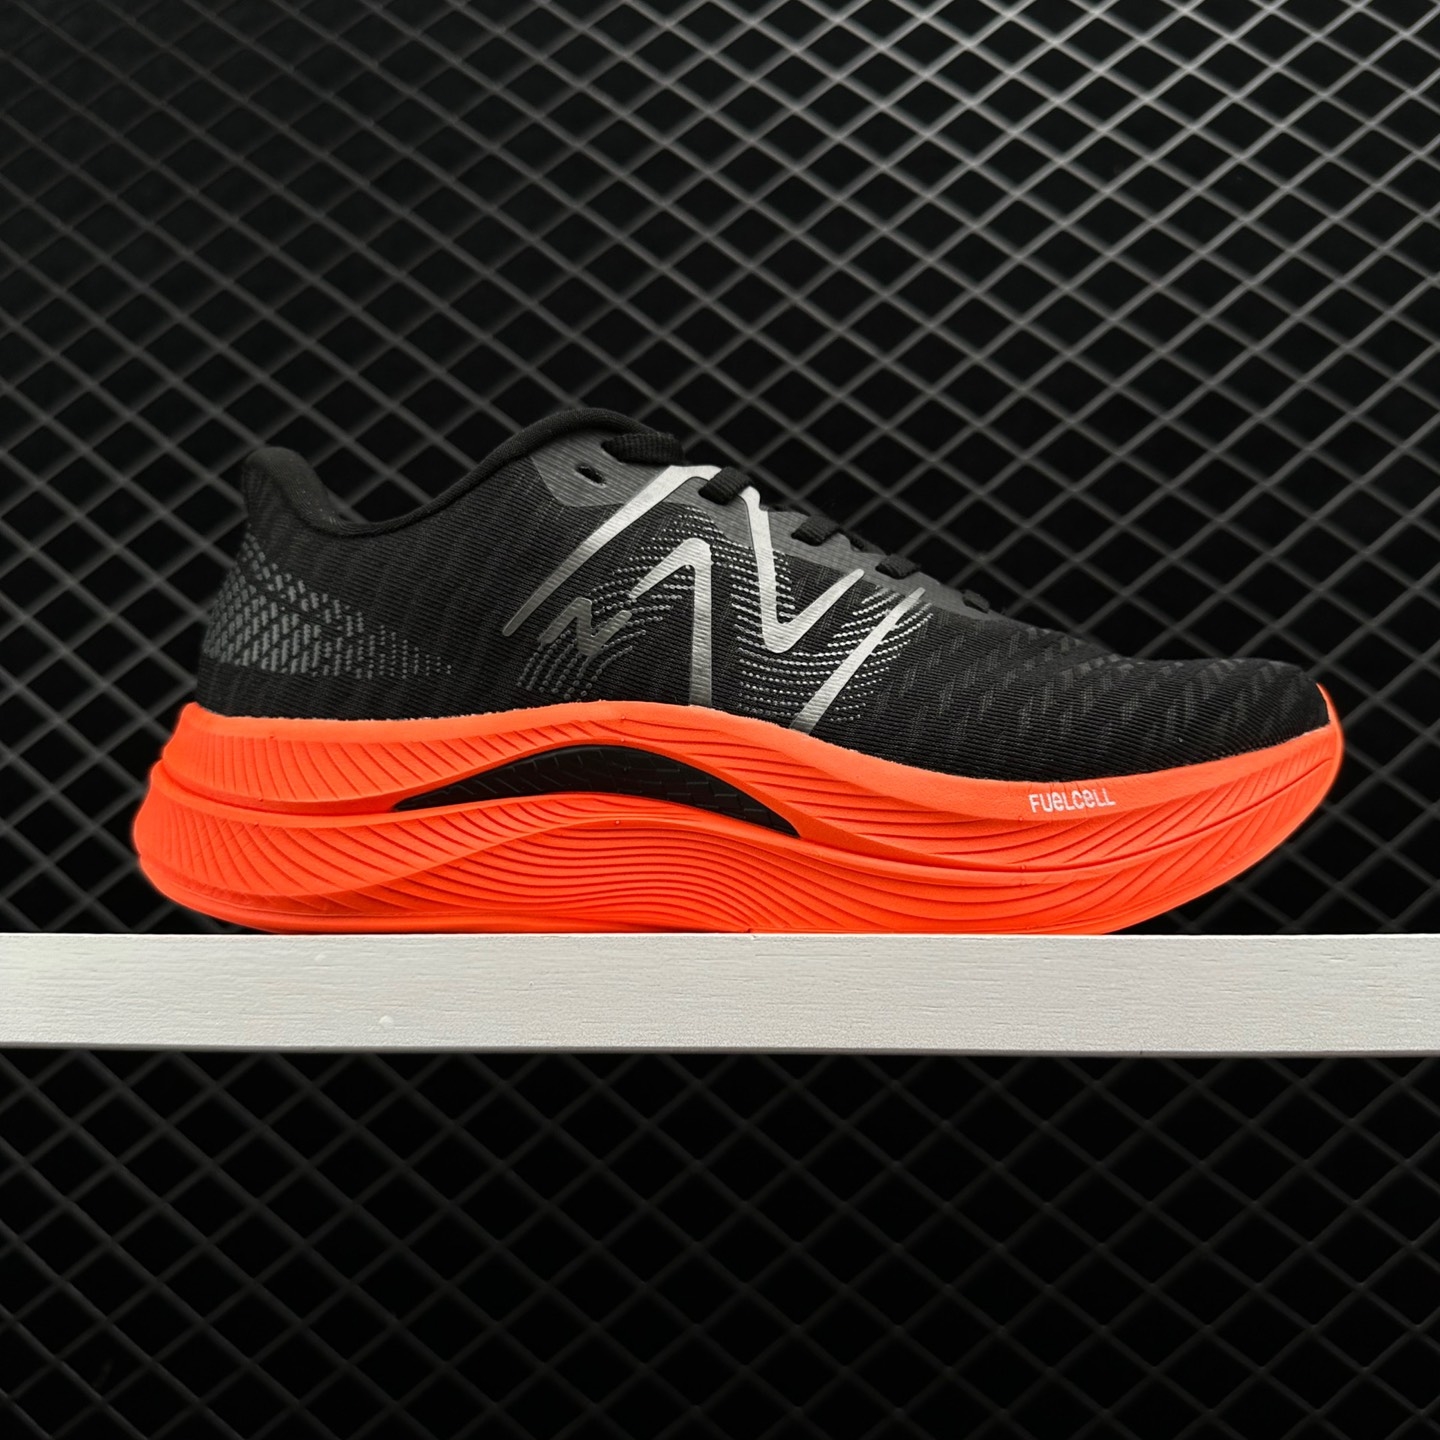 New Balance FuelCell Propel v4 Black Dragonfly MFCPRLO4 – High-Performance Footwear for Every Run